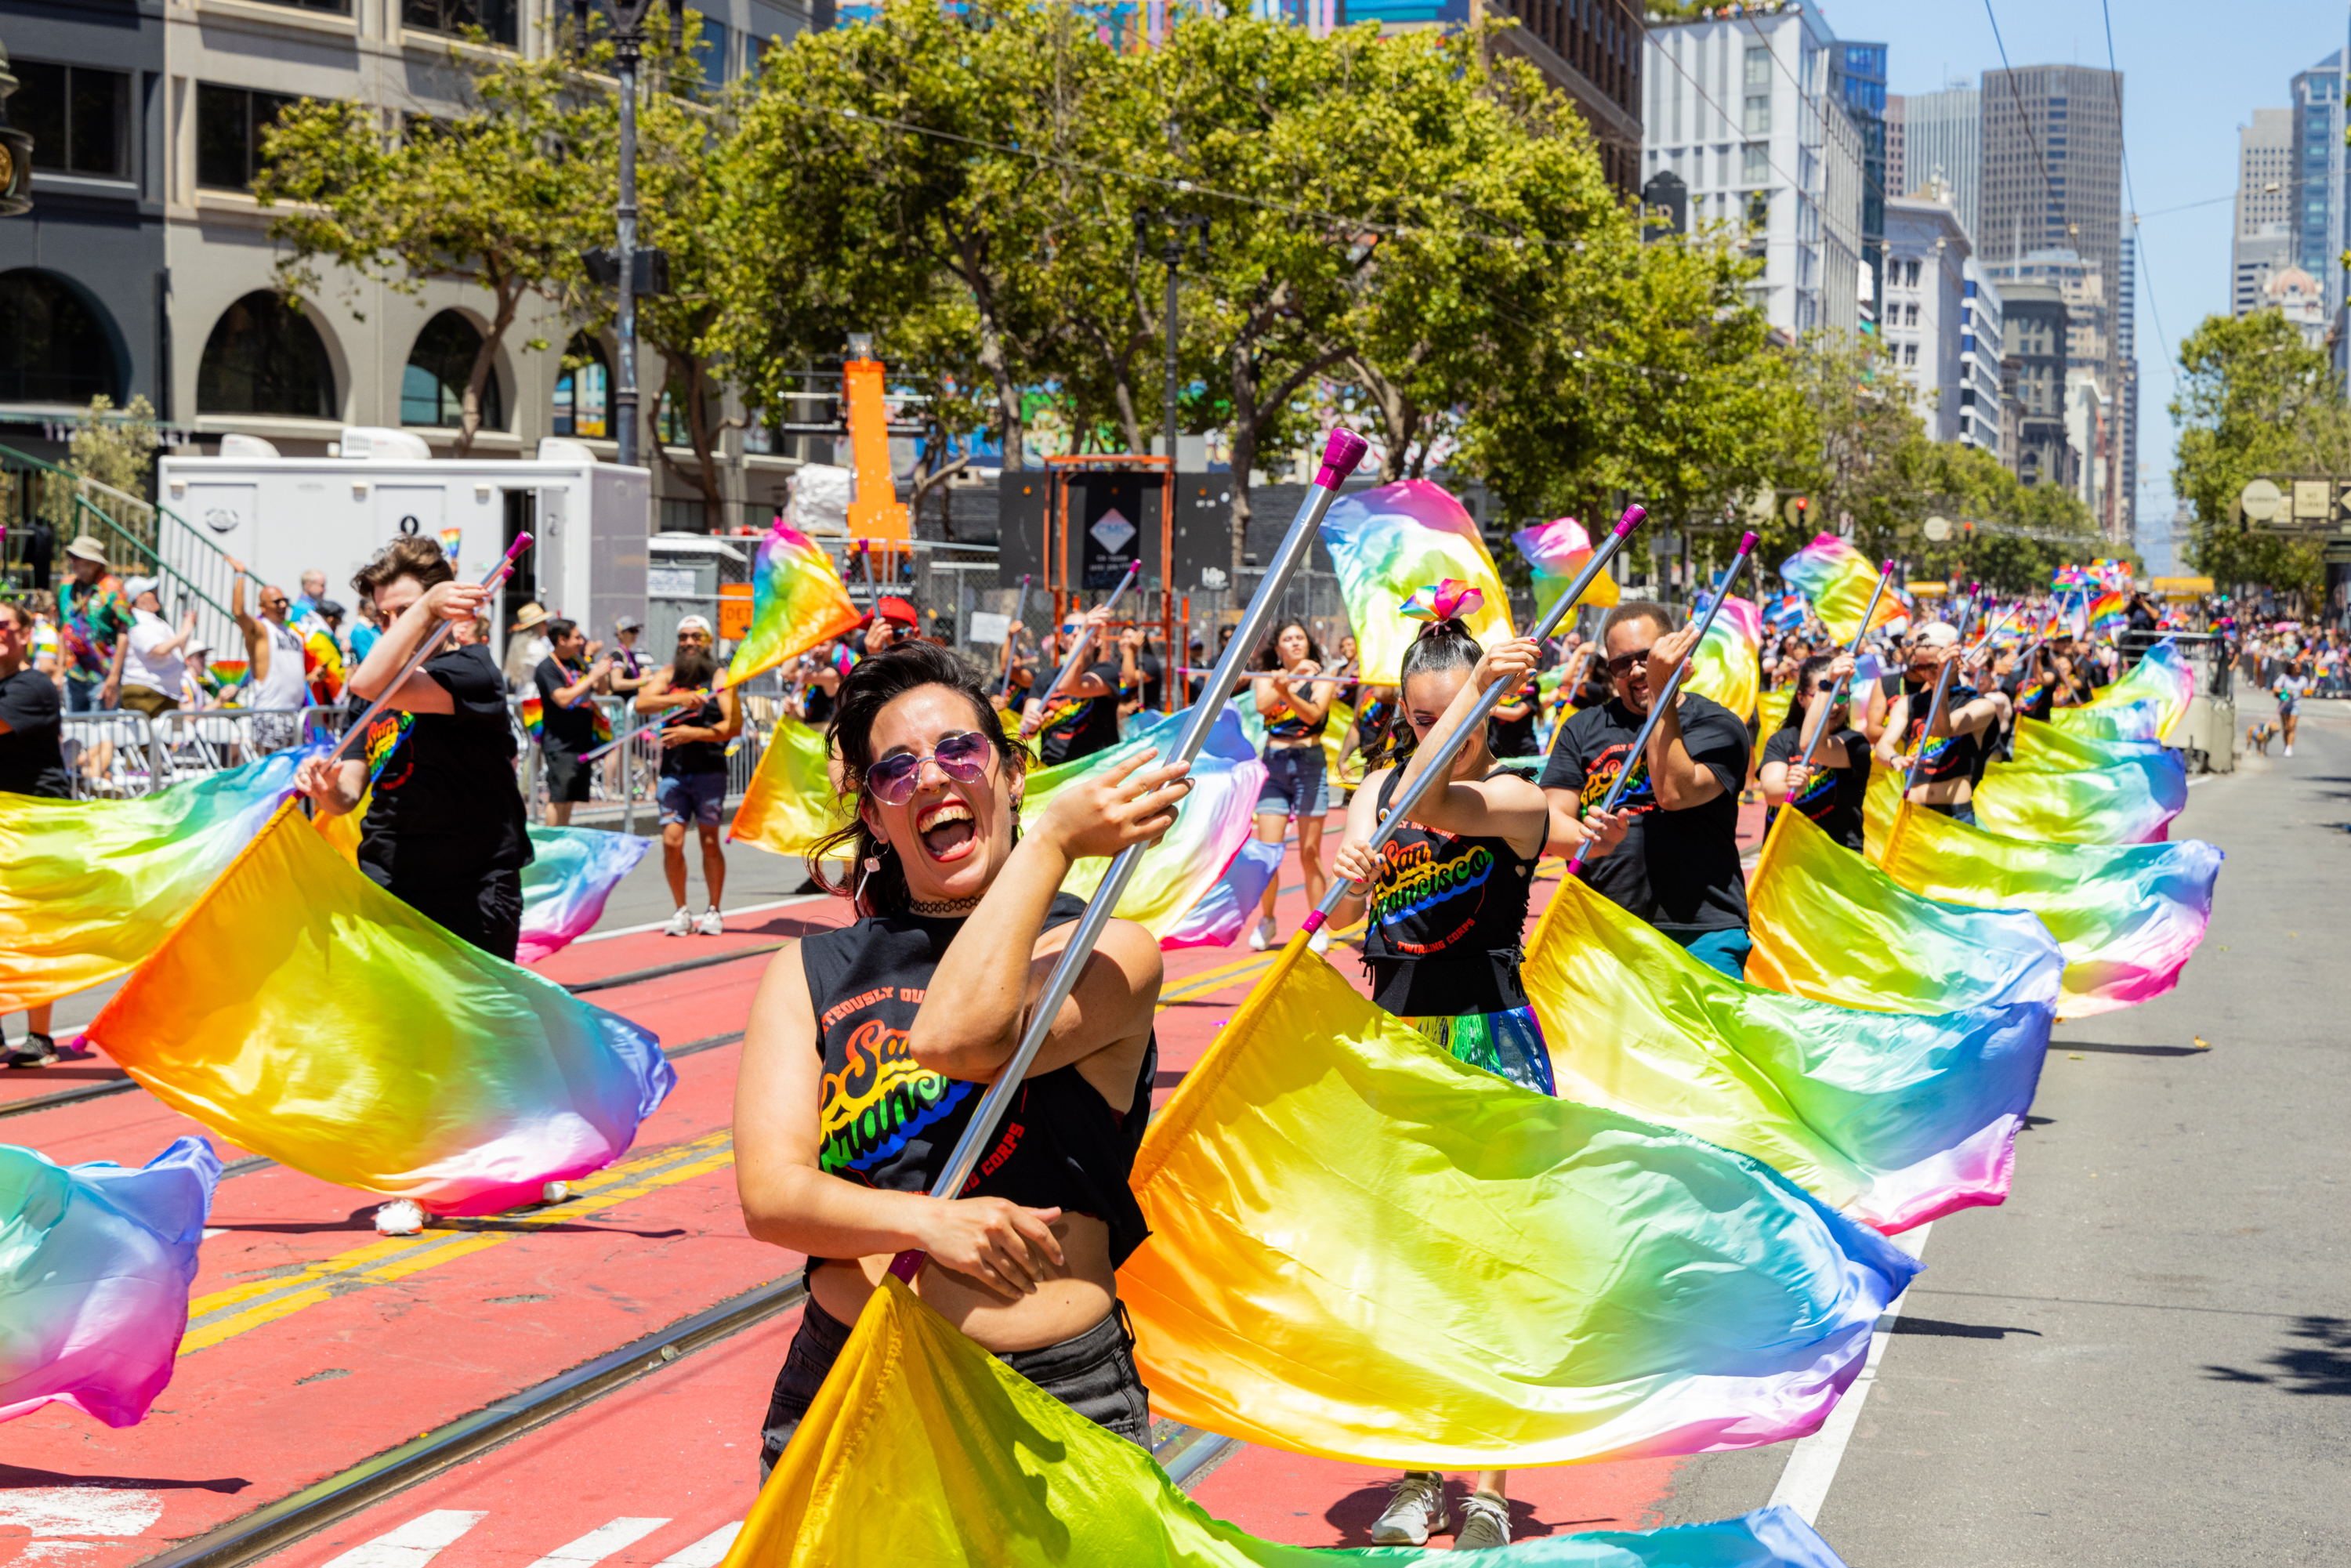 A group of people, joyfully waving colorful rainbow flags, parades down a city street lined with buildings and spectators under a bright, sunny sky.